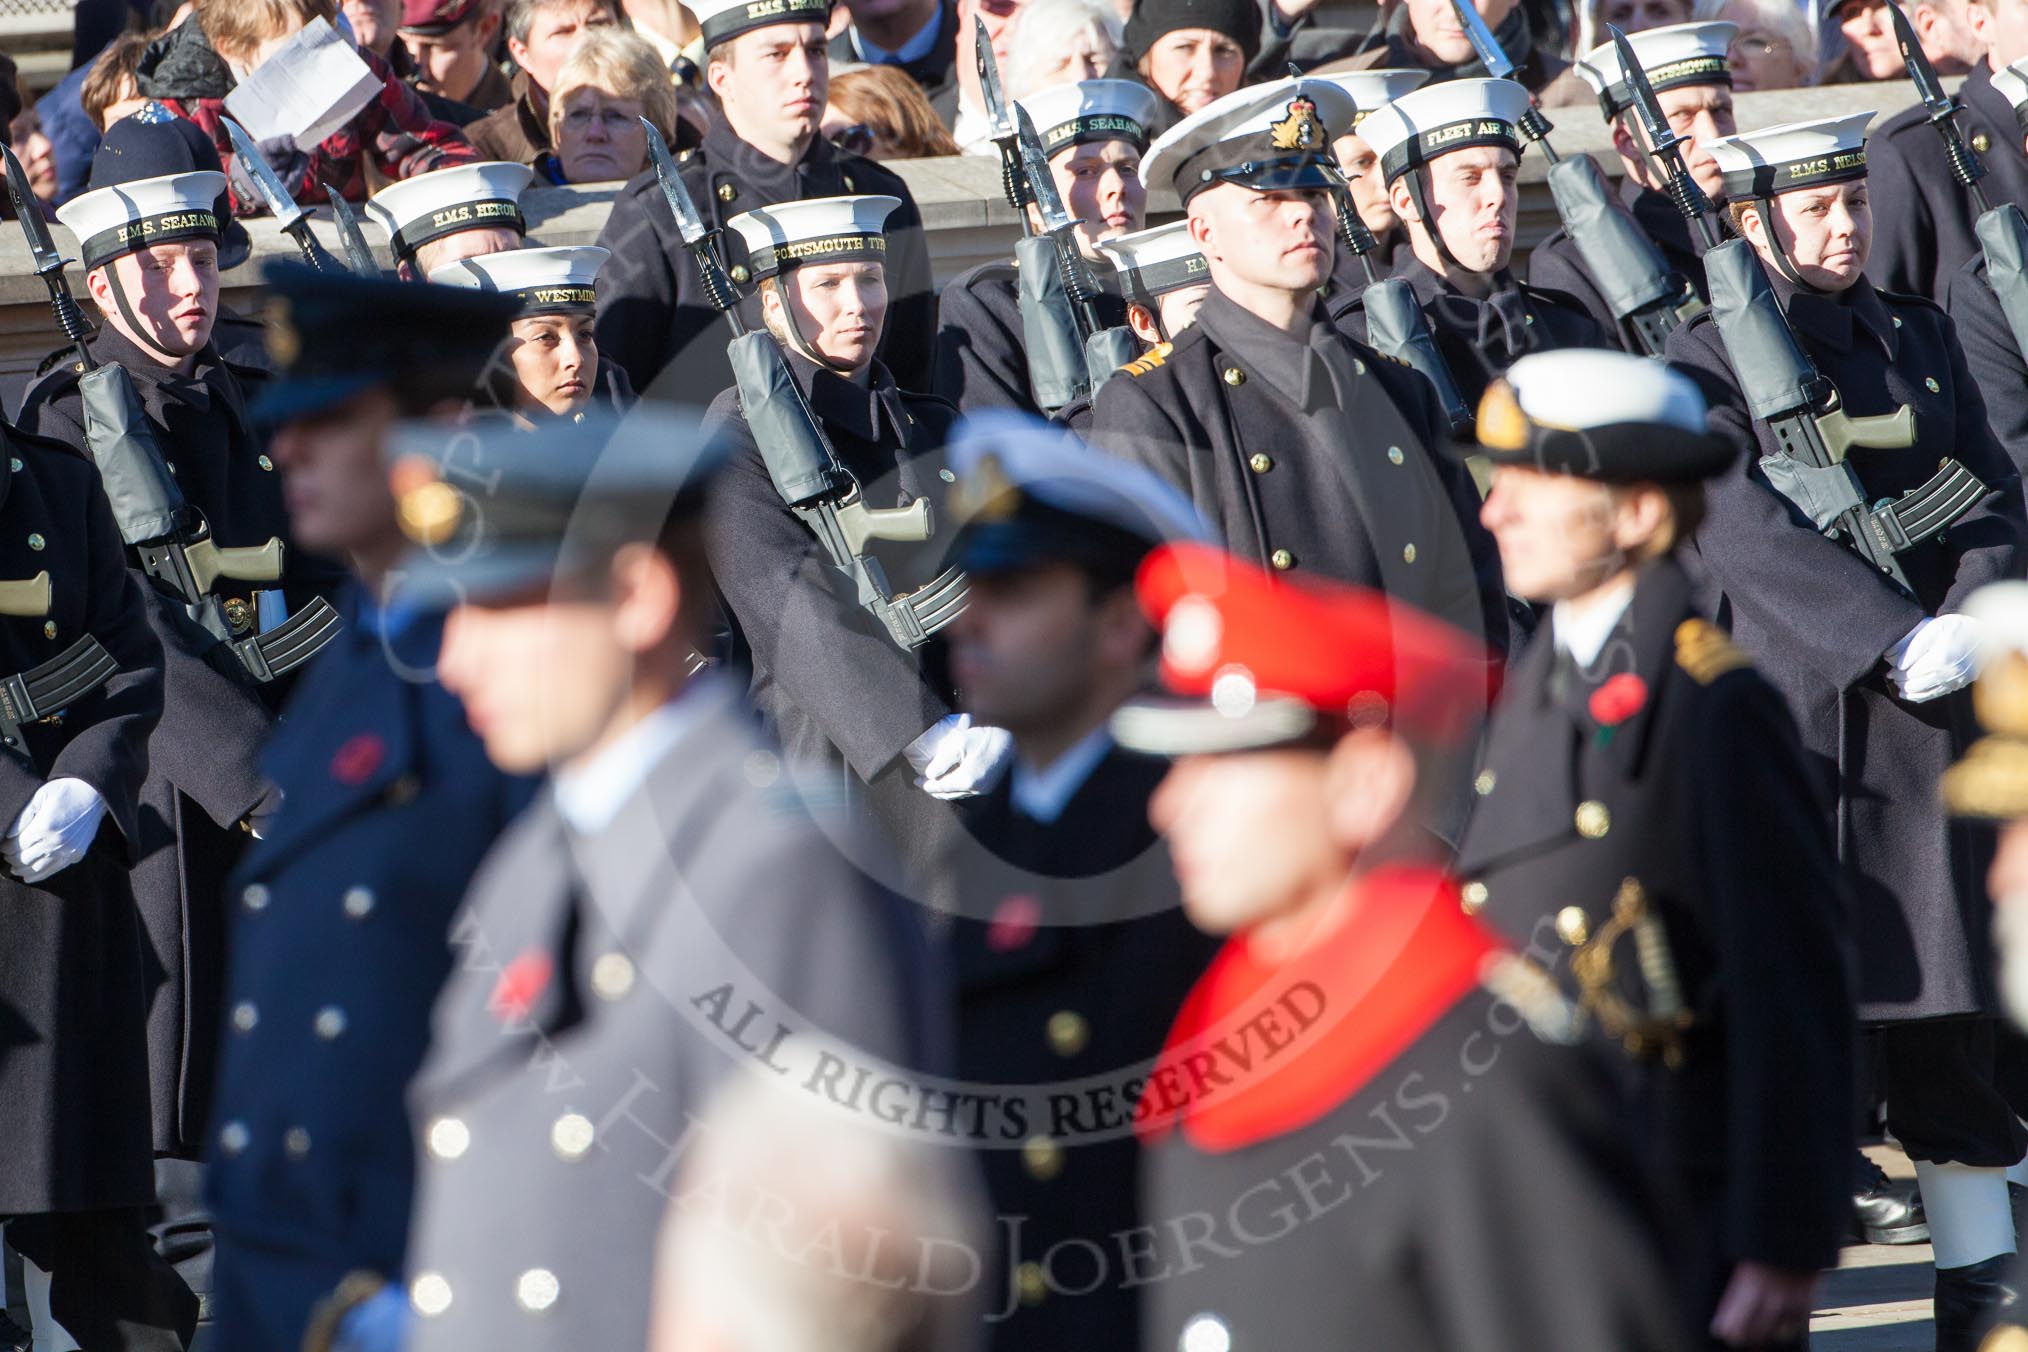 Members of the Royal Navy during the service held by the Bishop of London. In the foreground, and out of focus, the Duke of Cambridge and the Earl of Wessex.